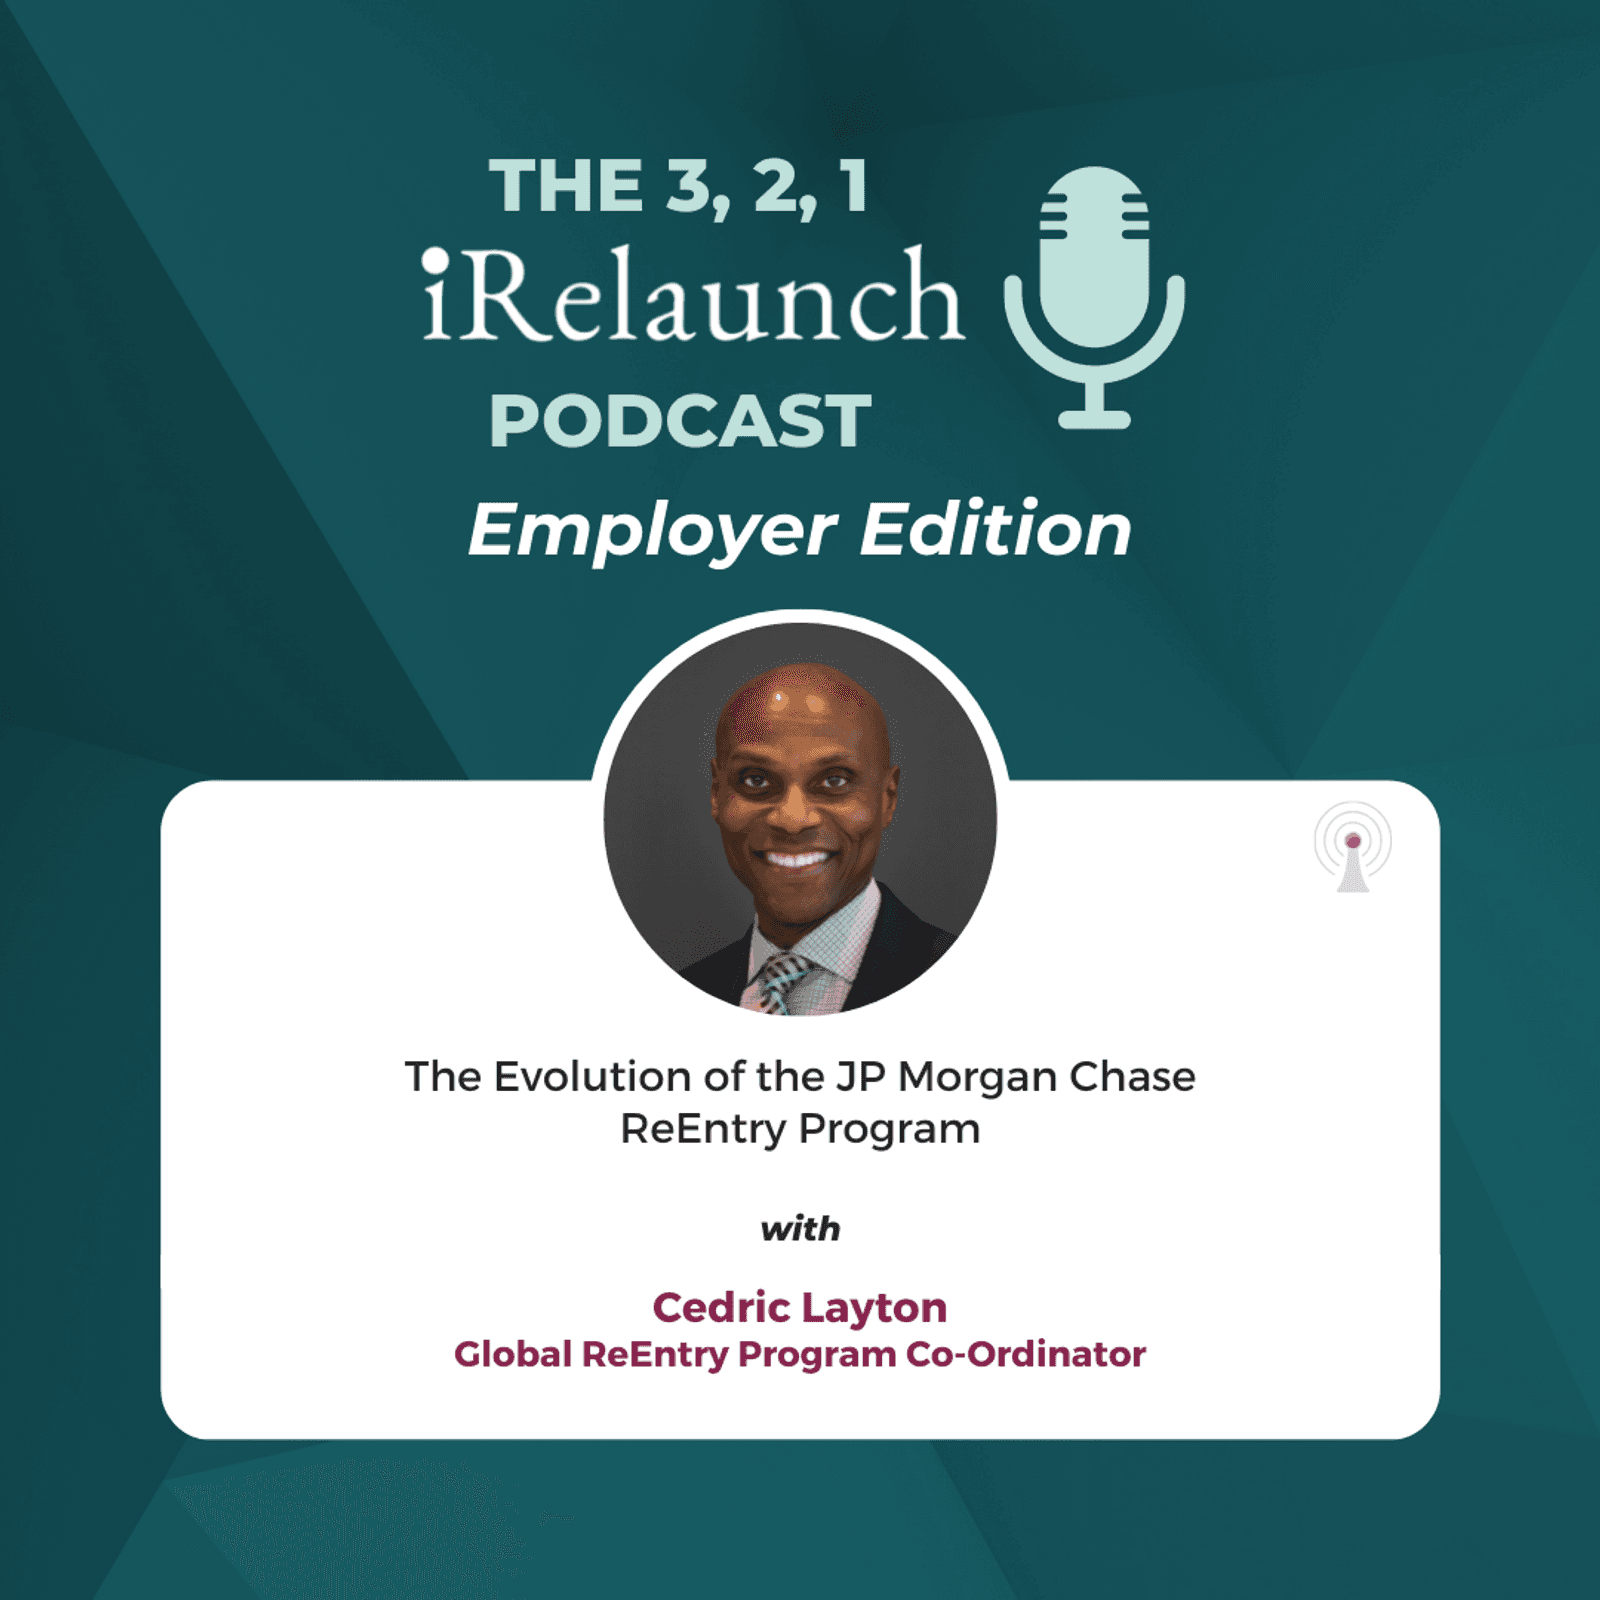 3 2 1 i Relaunch Podcast Employer Edition 1080 x 1080